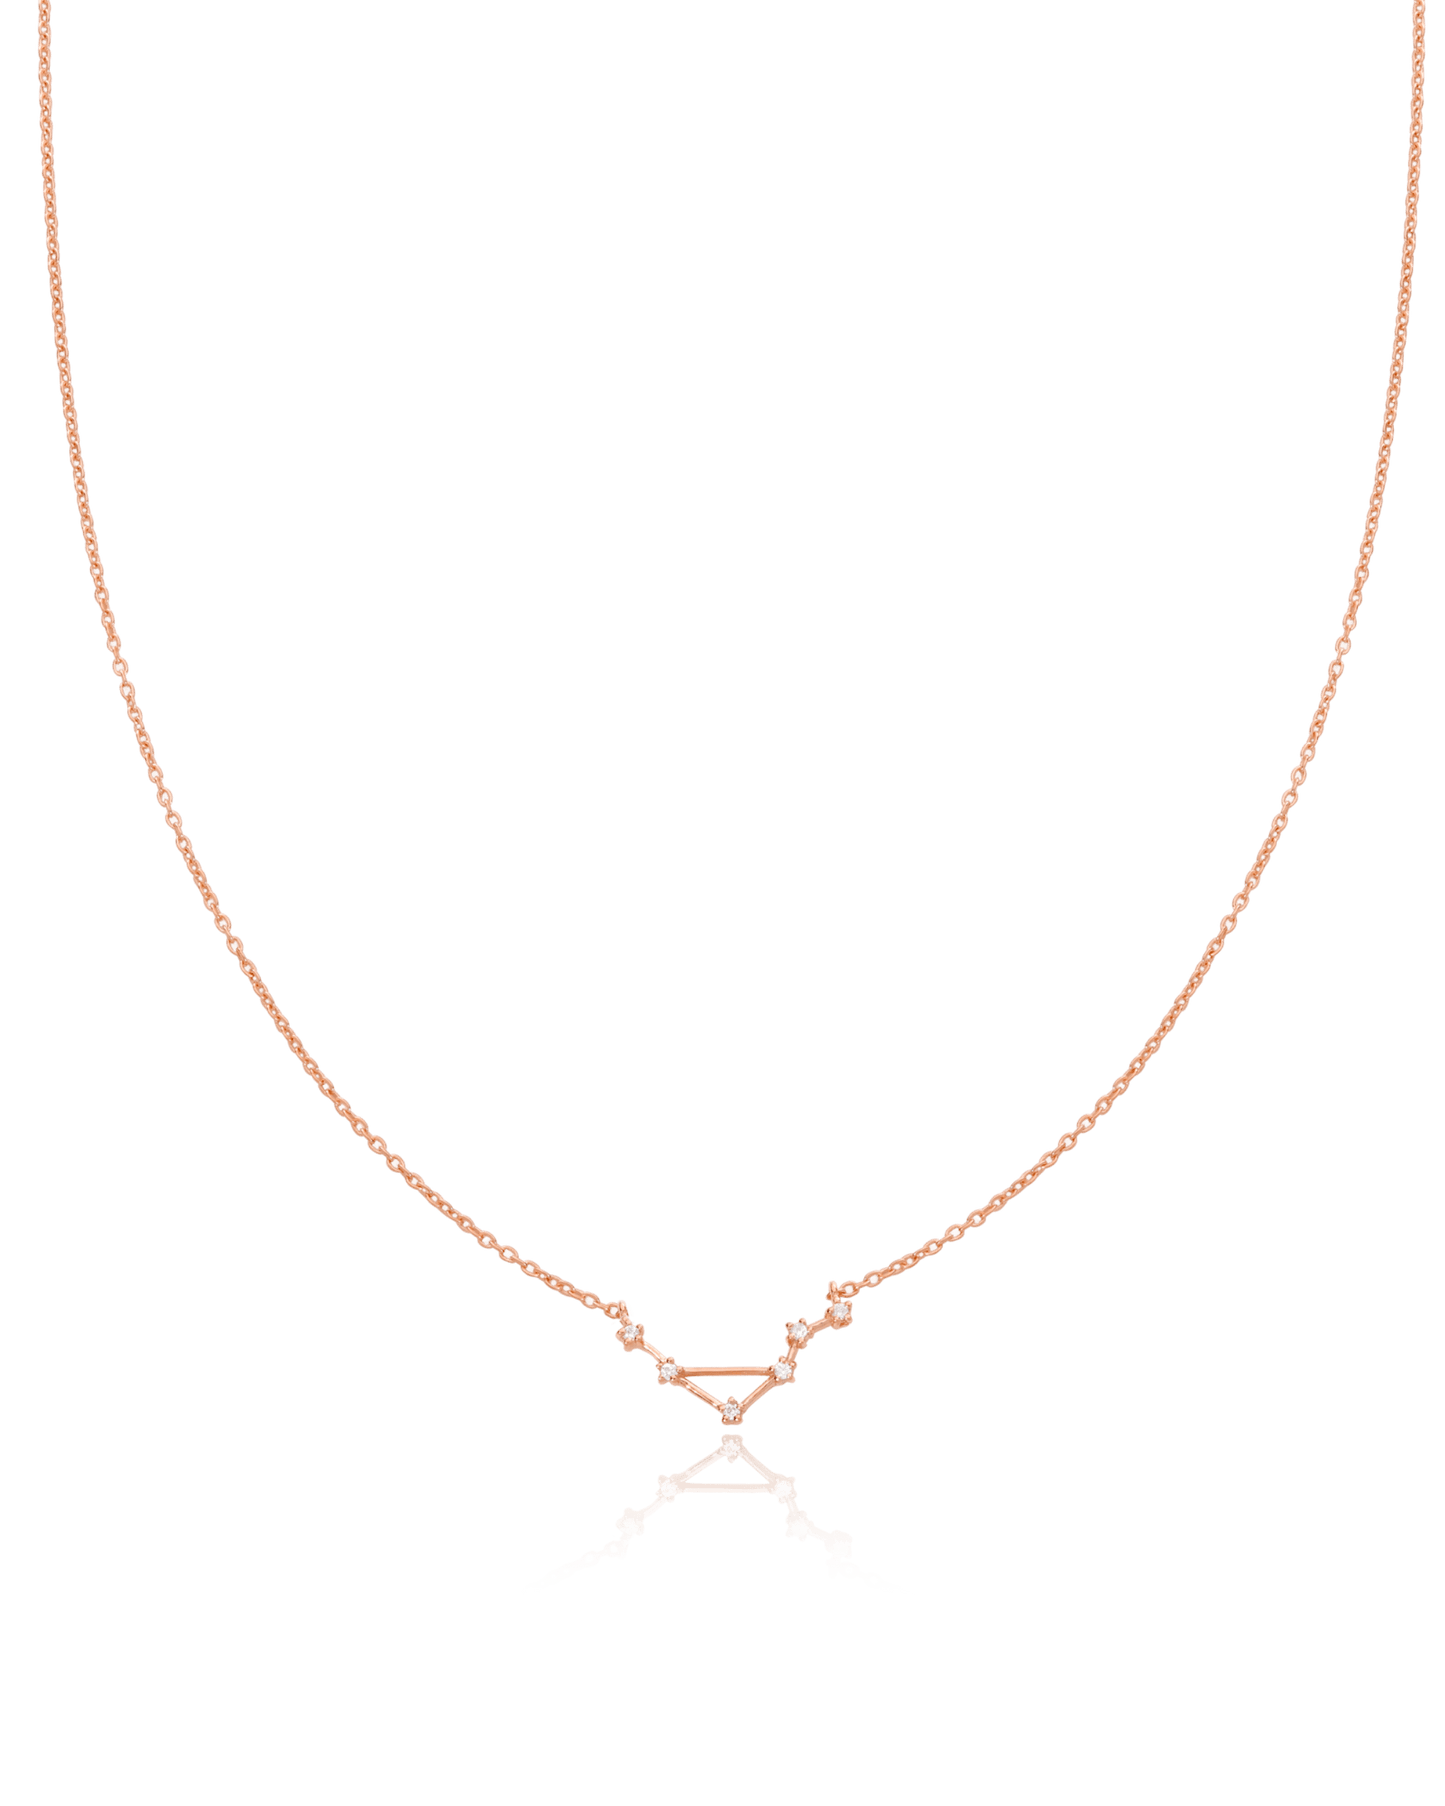 Single Constellation Necklace with Diamonds - 925 Sterling Silver Necklaces magal-dev 